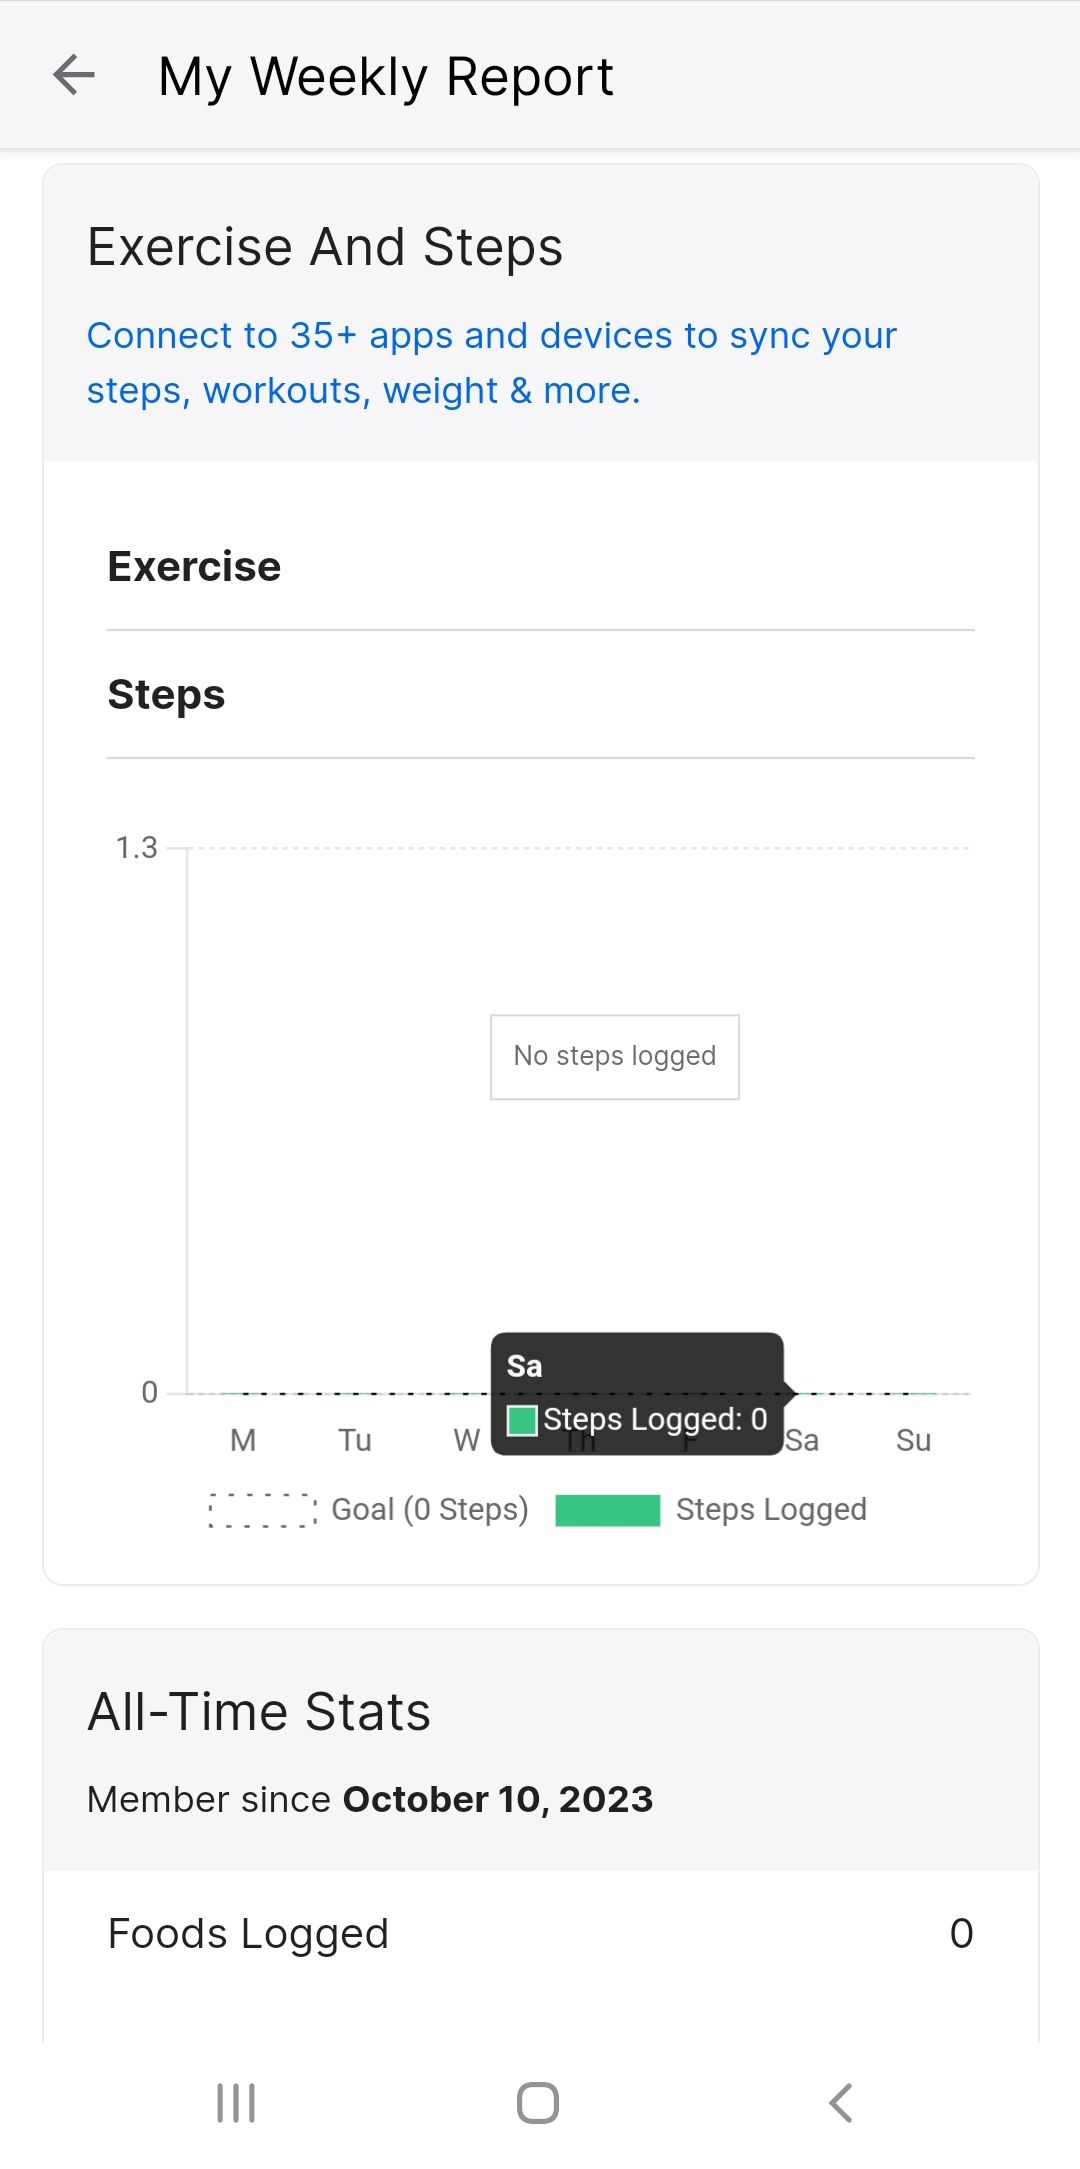 myfitnesspal weekly report for exercise and steps